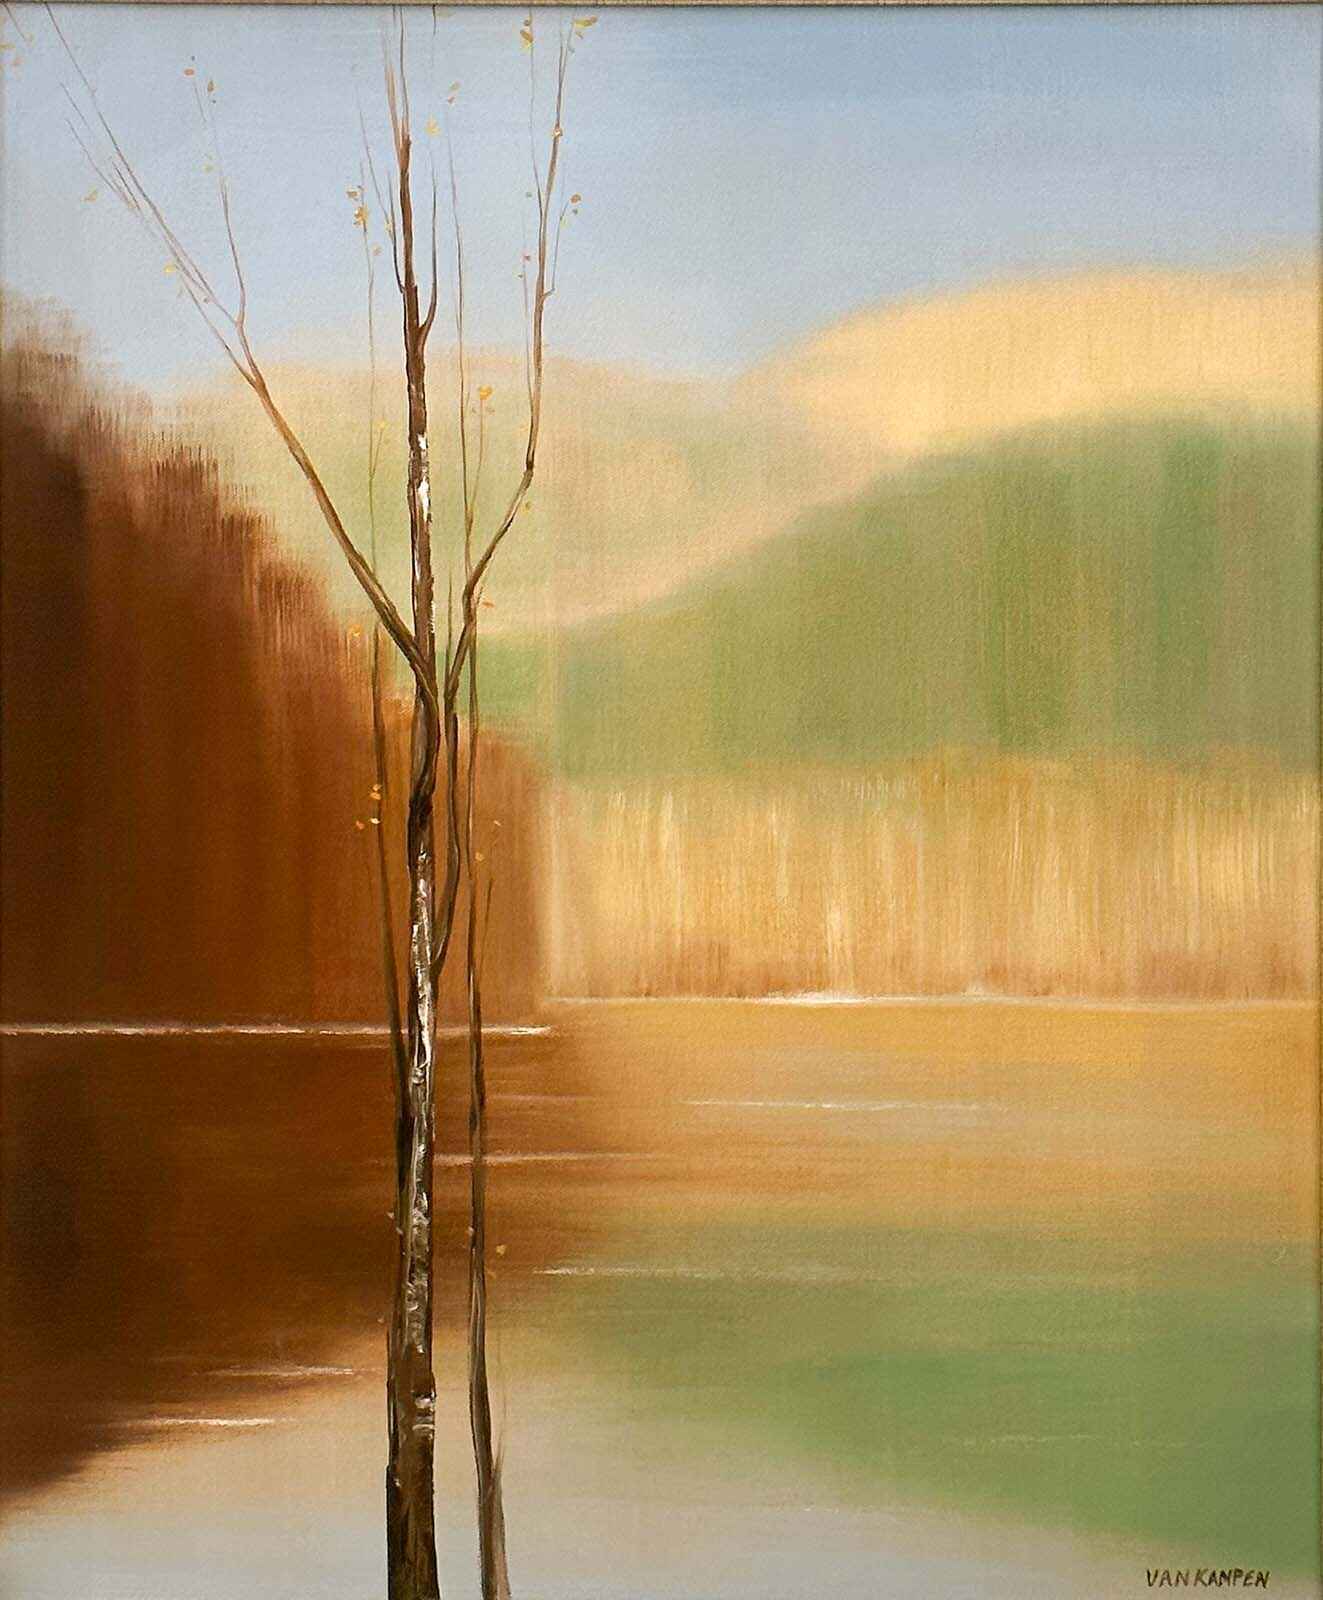 Contemporary art. Title: Silent Reflection, Oil on Canvas, 24x20 in by Canadian artist Katherine van Kampen.